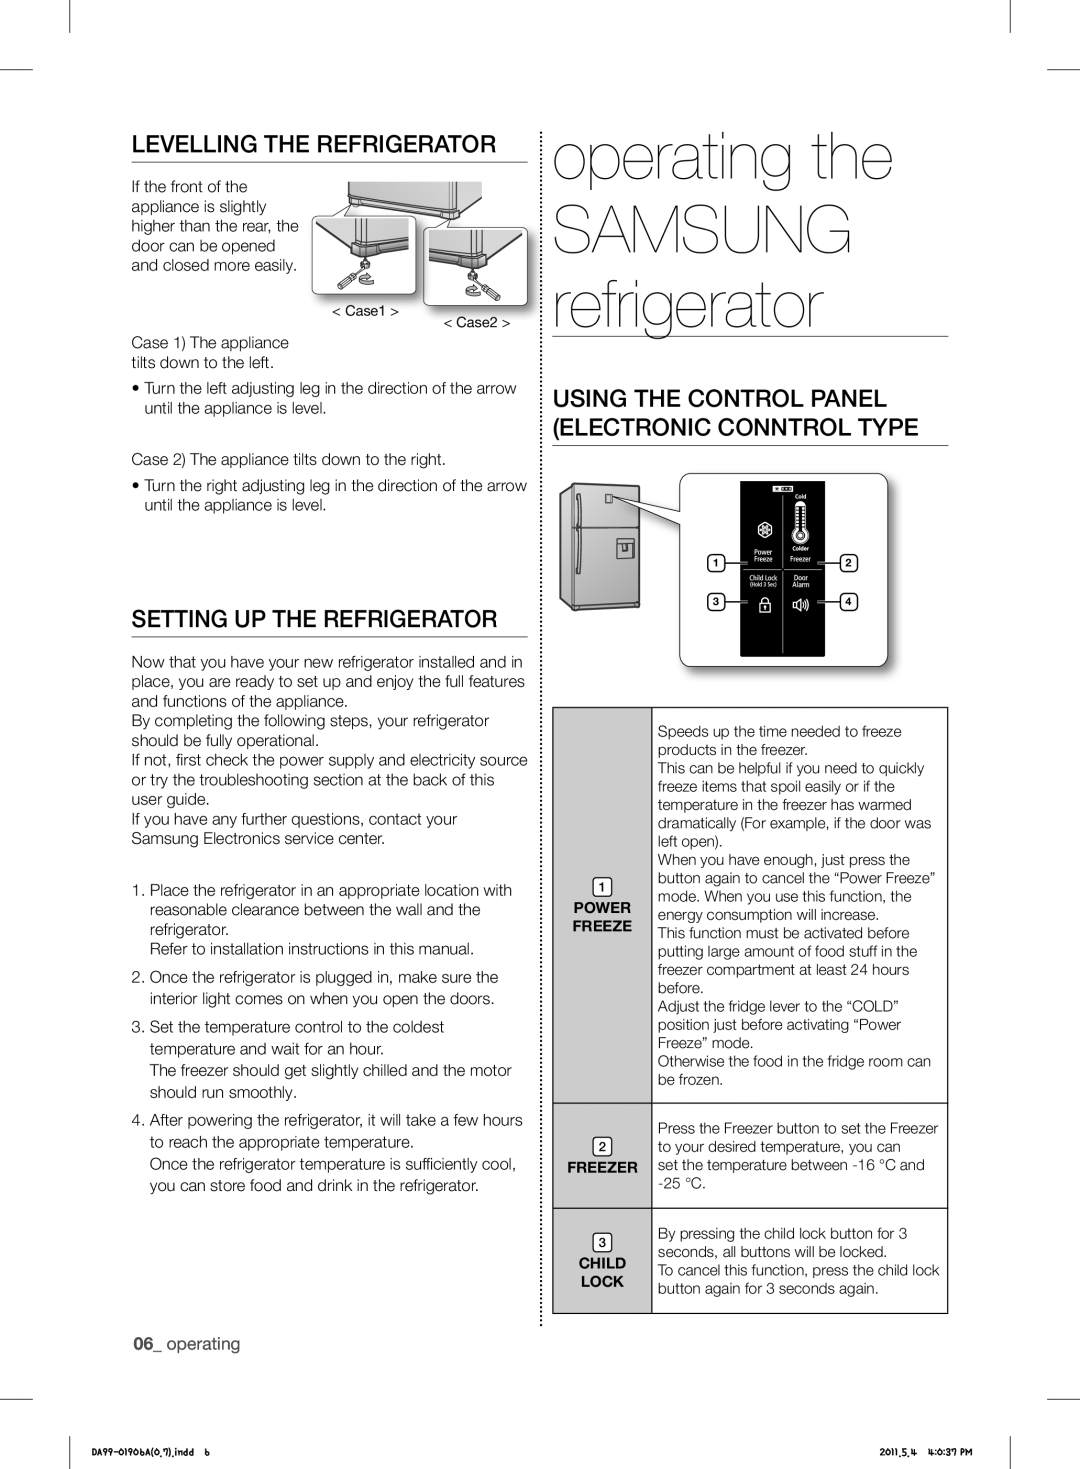 Samsung RT63PBPN1/XEF manual operating the, SAMSUNG refrigerator, Levelling The Refrigerator, Setting Up The Refrigerator 